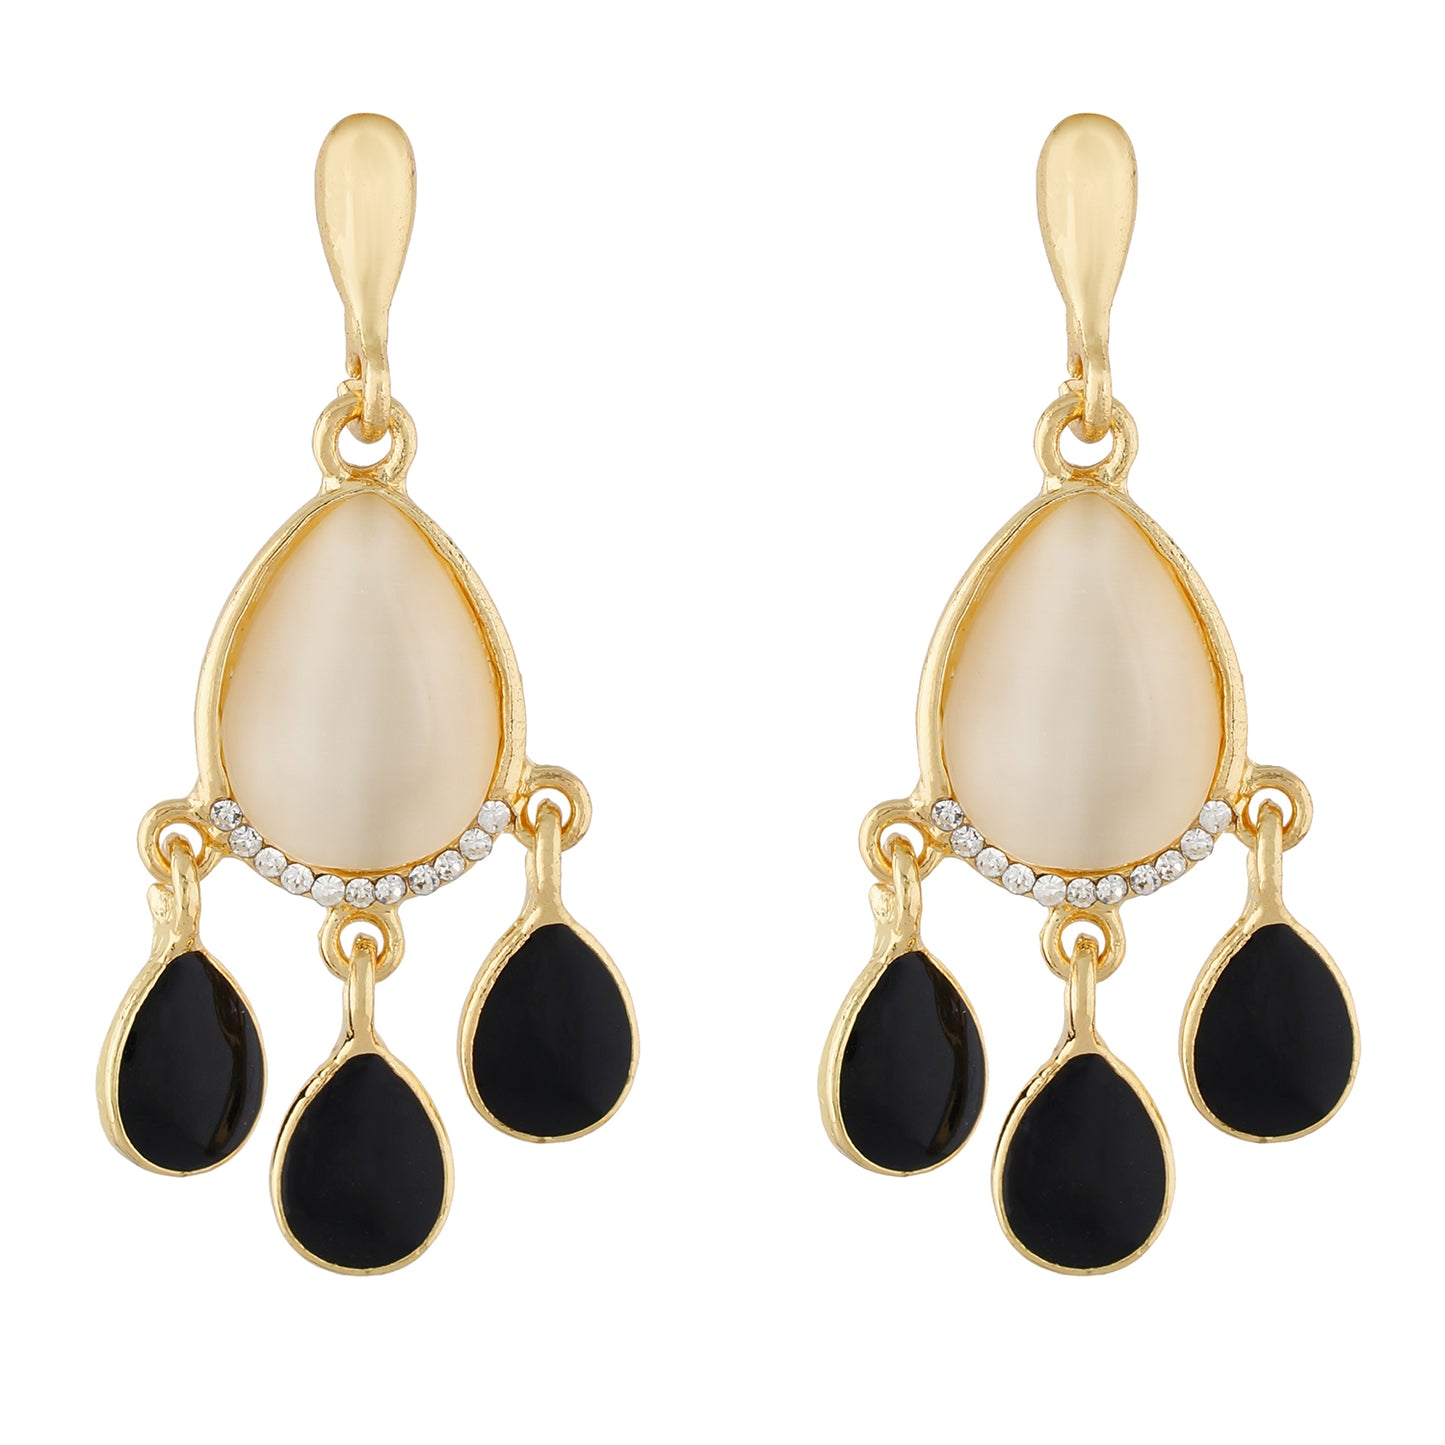 Fashionable Black and Gold Colour Drop Design Earring for Girls and Women